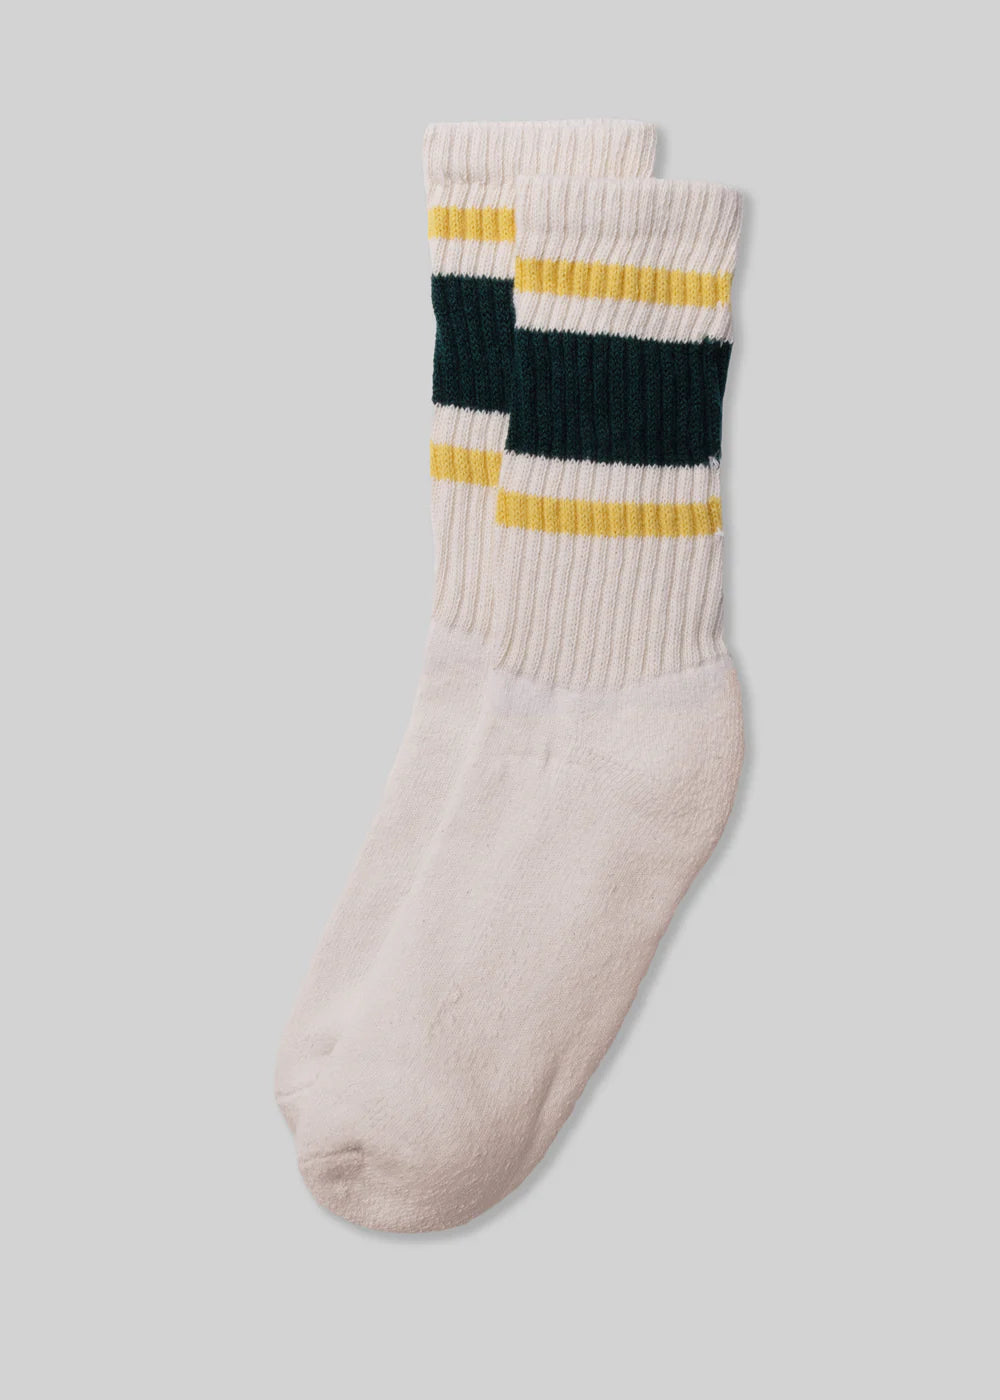 American trench - the retro stripe sock  -  forest/ amber